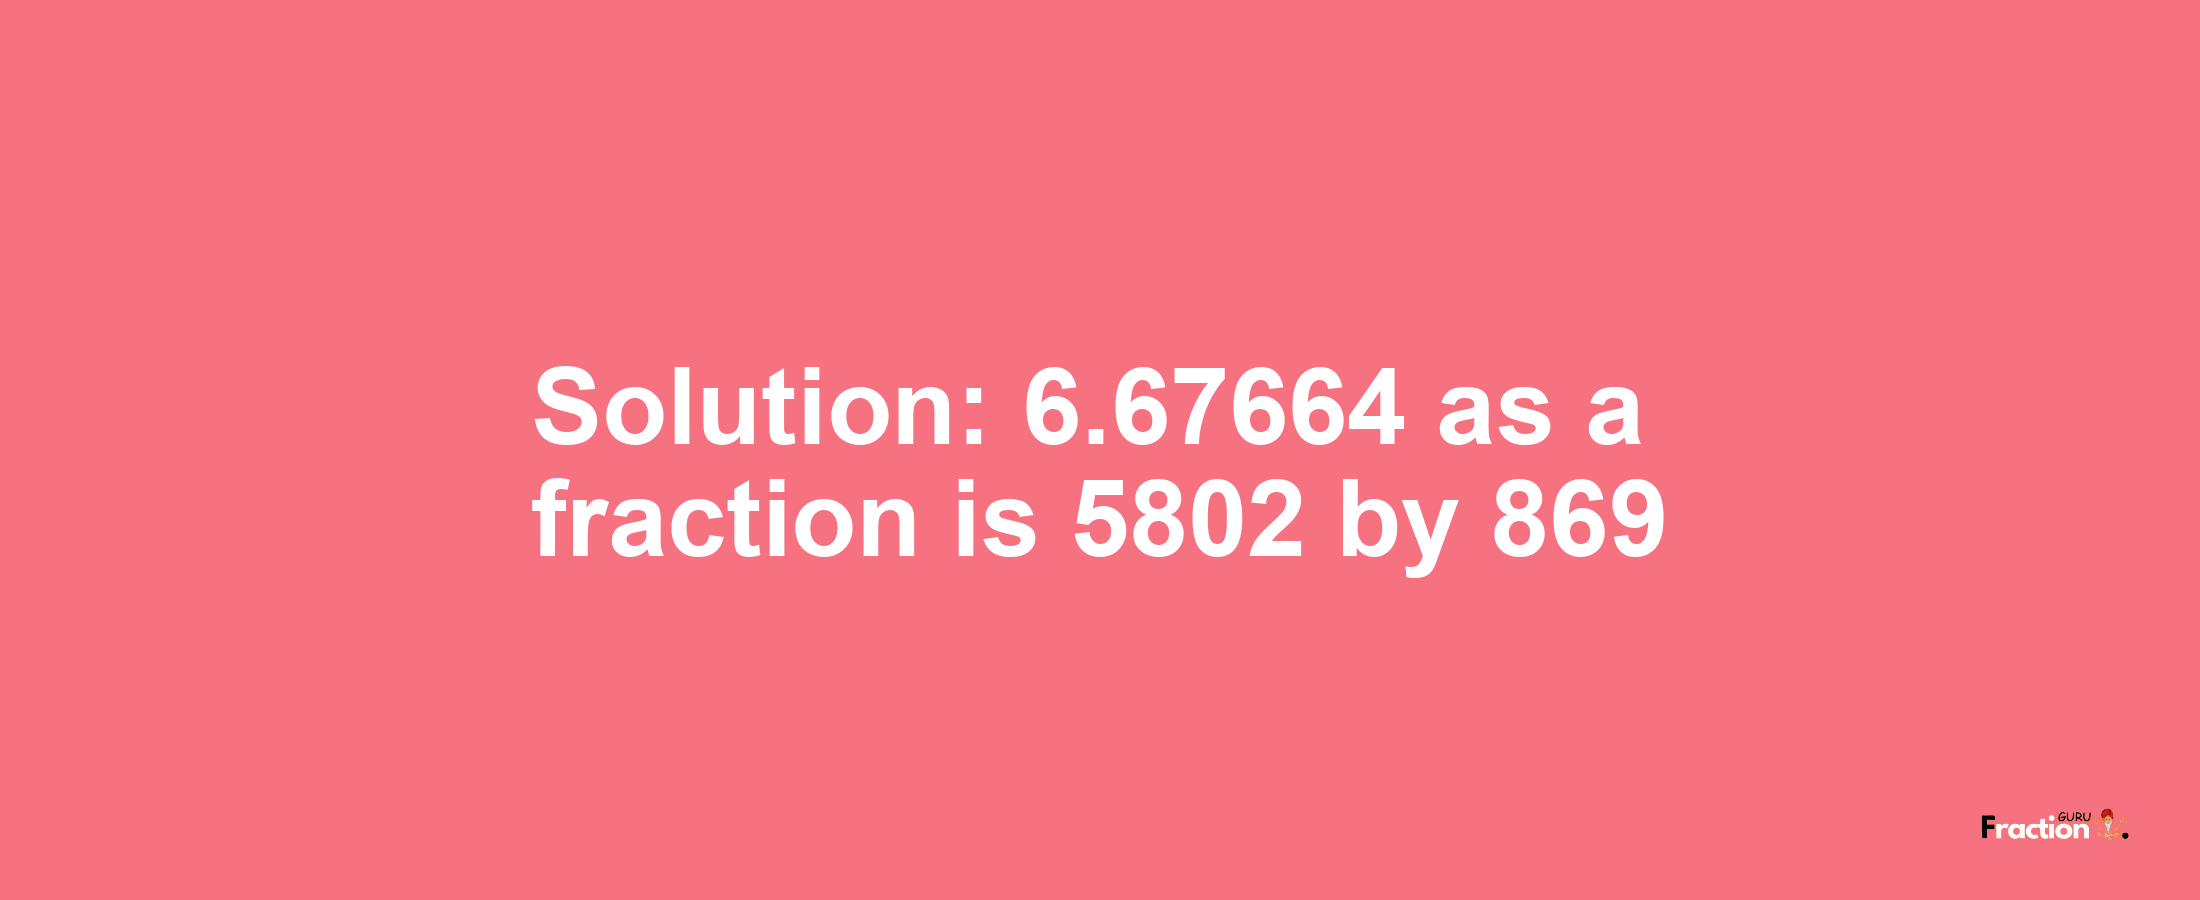 Solution:6.67664 as a fraction is 5802/869